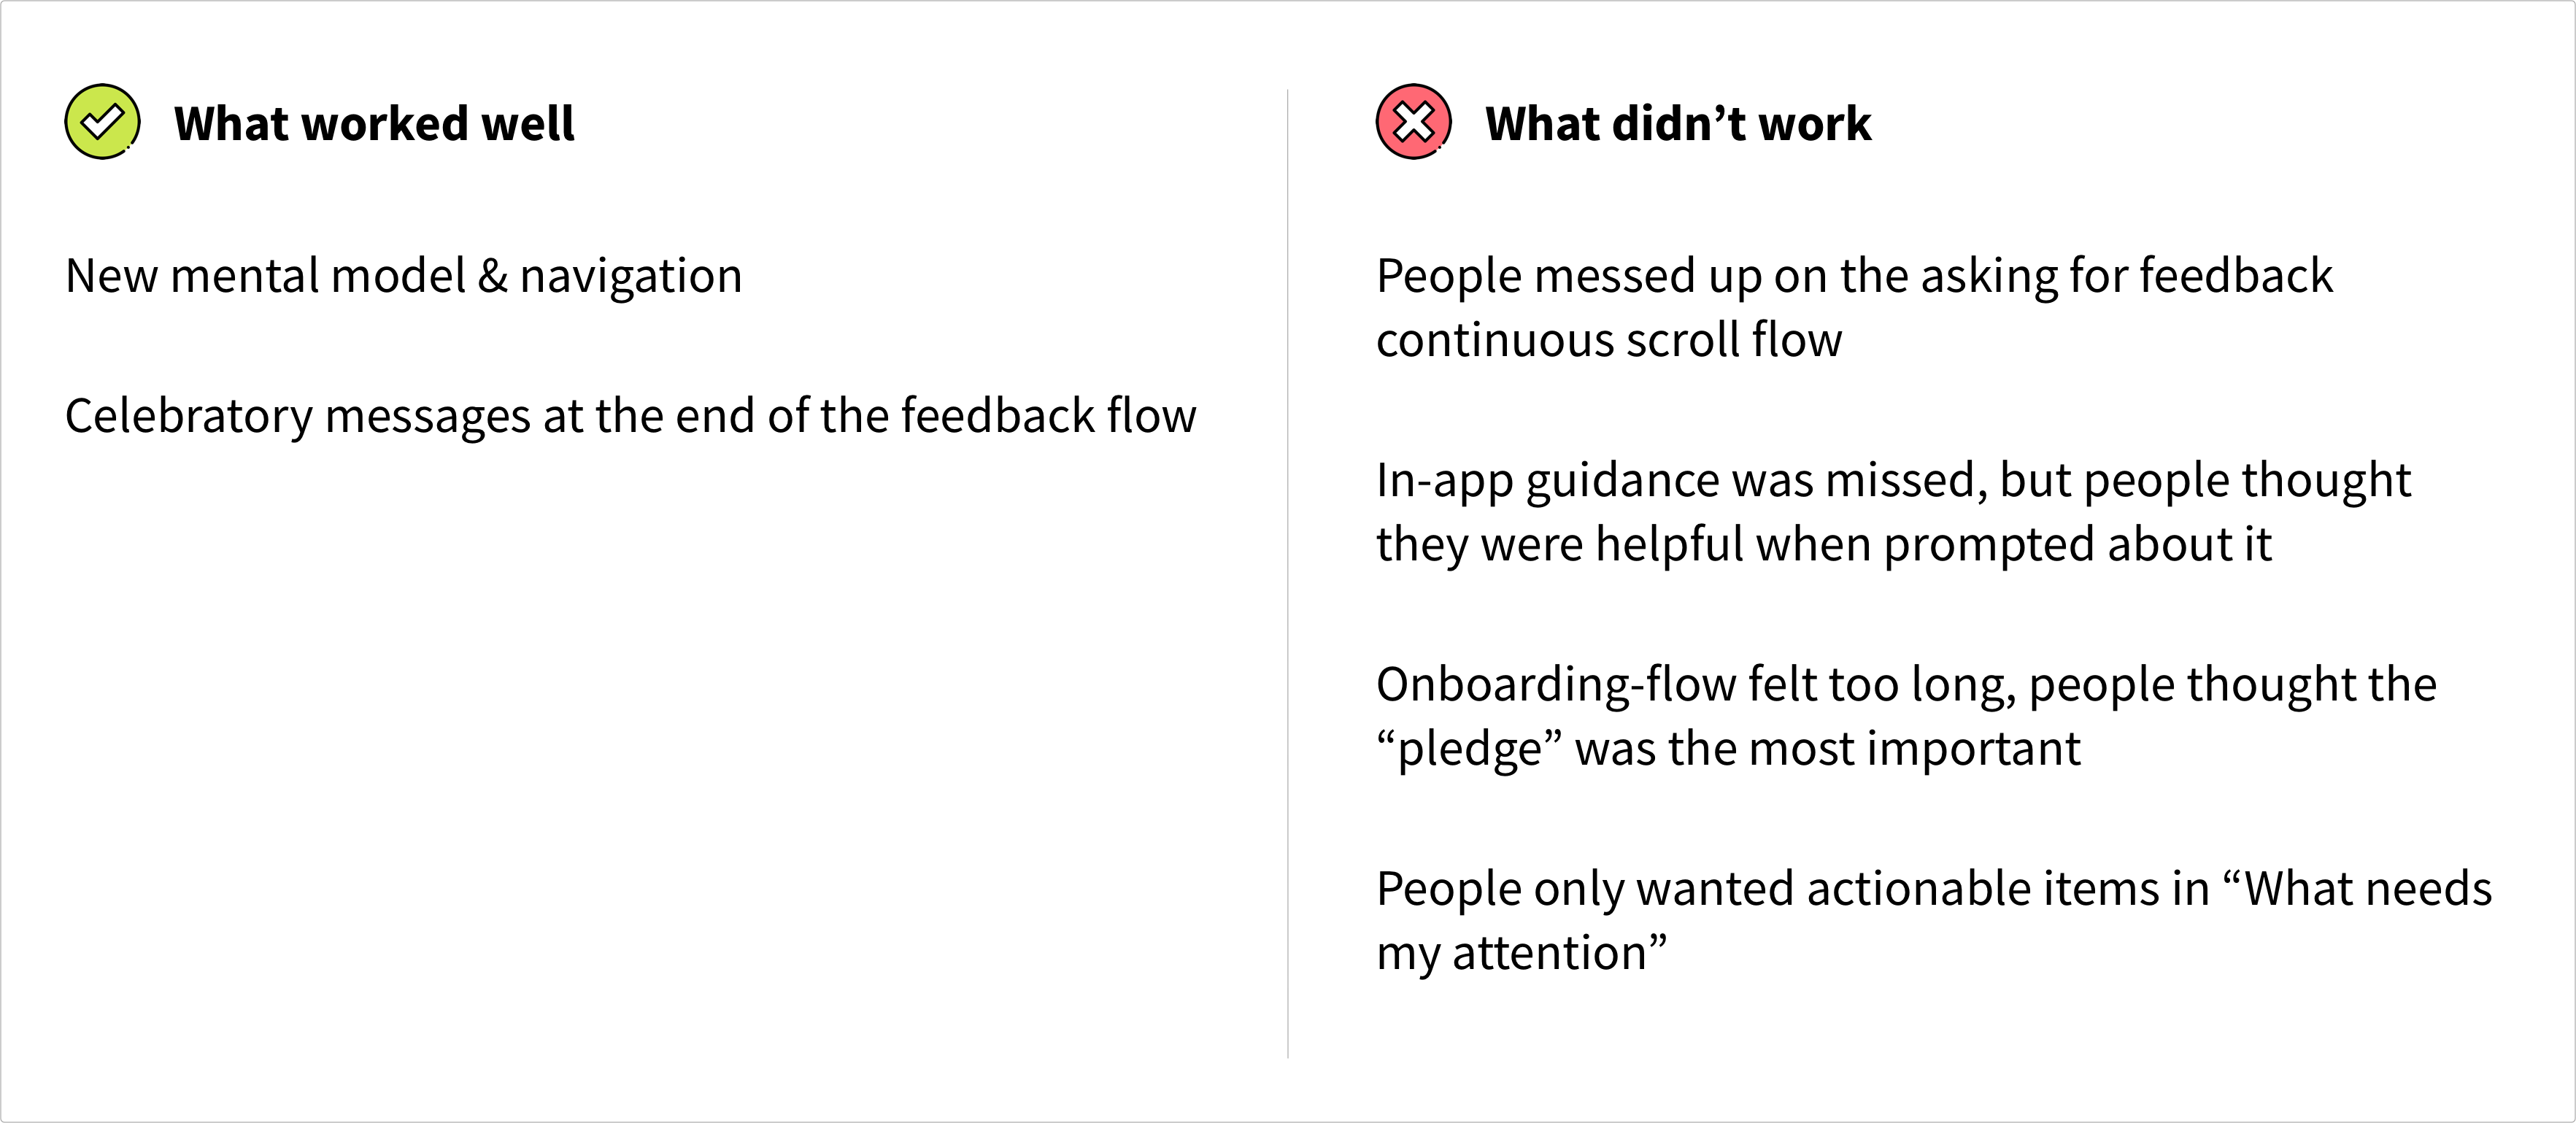 Things that went well: mental model & navigation, celebratory messages. Things that didn't work: continuous scroll, in-app guidance was missed, onboarding felt too long, people want actionable items for focus